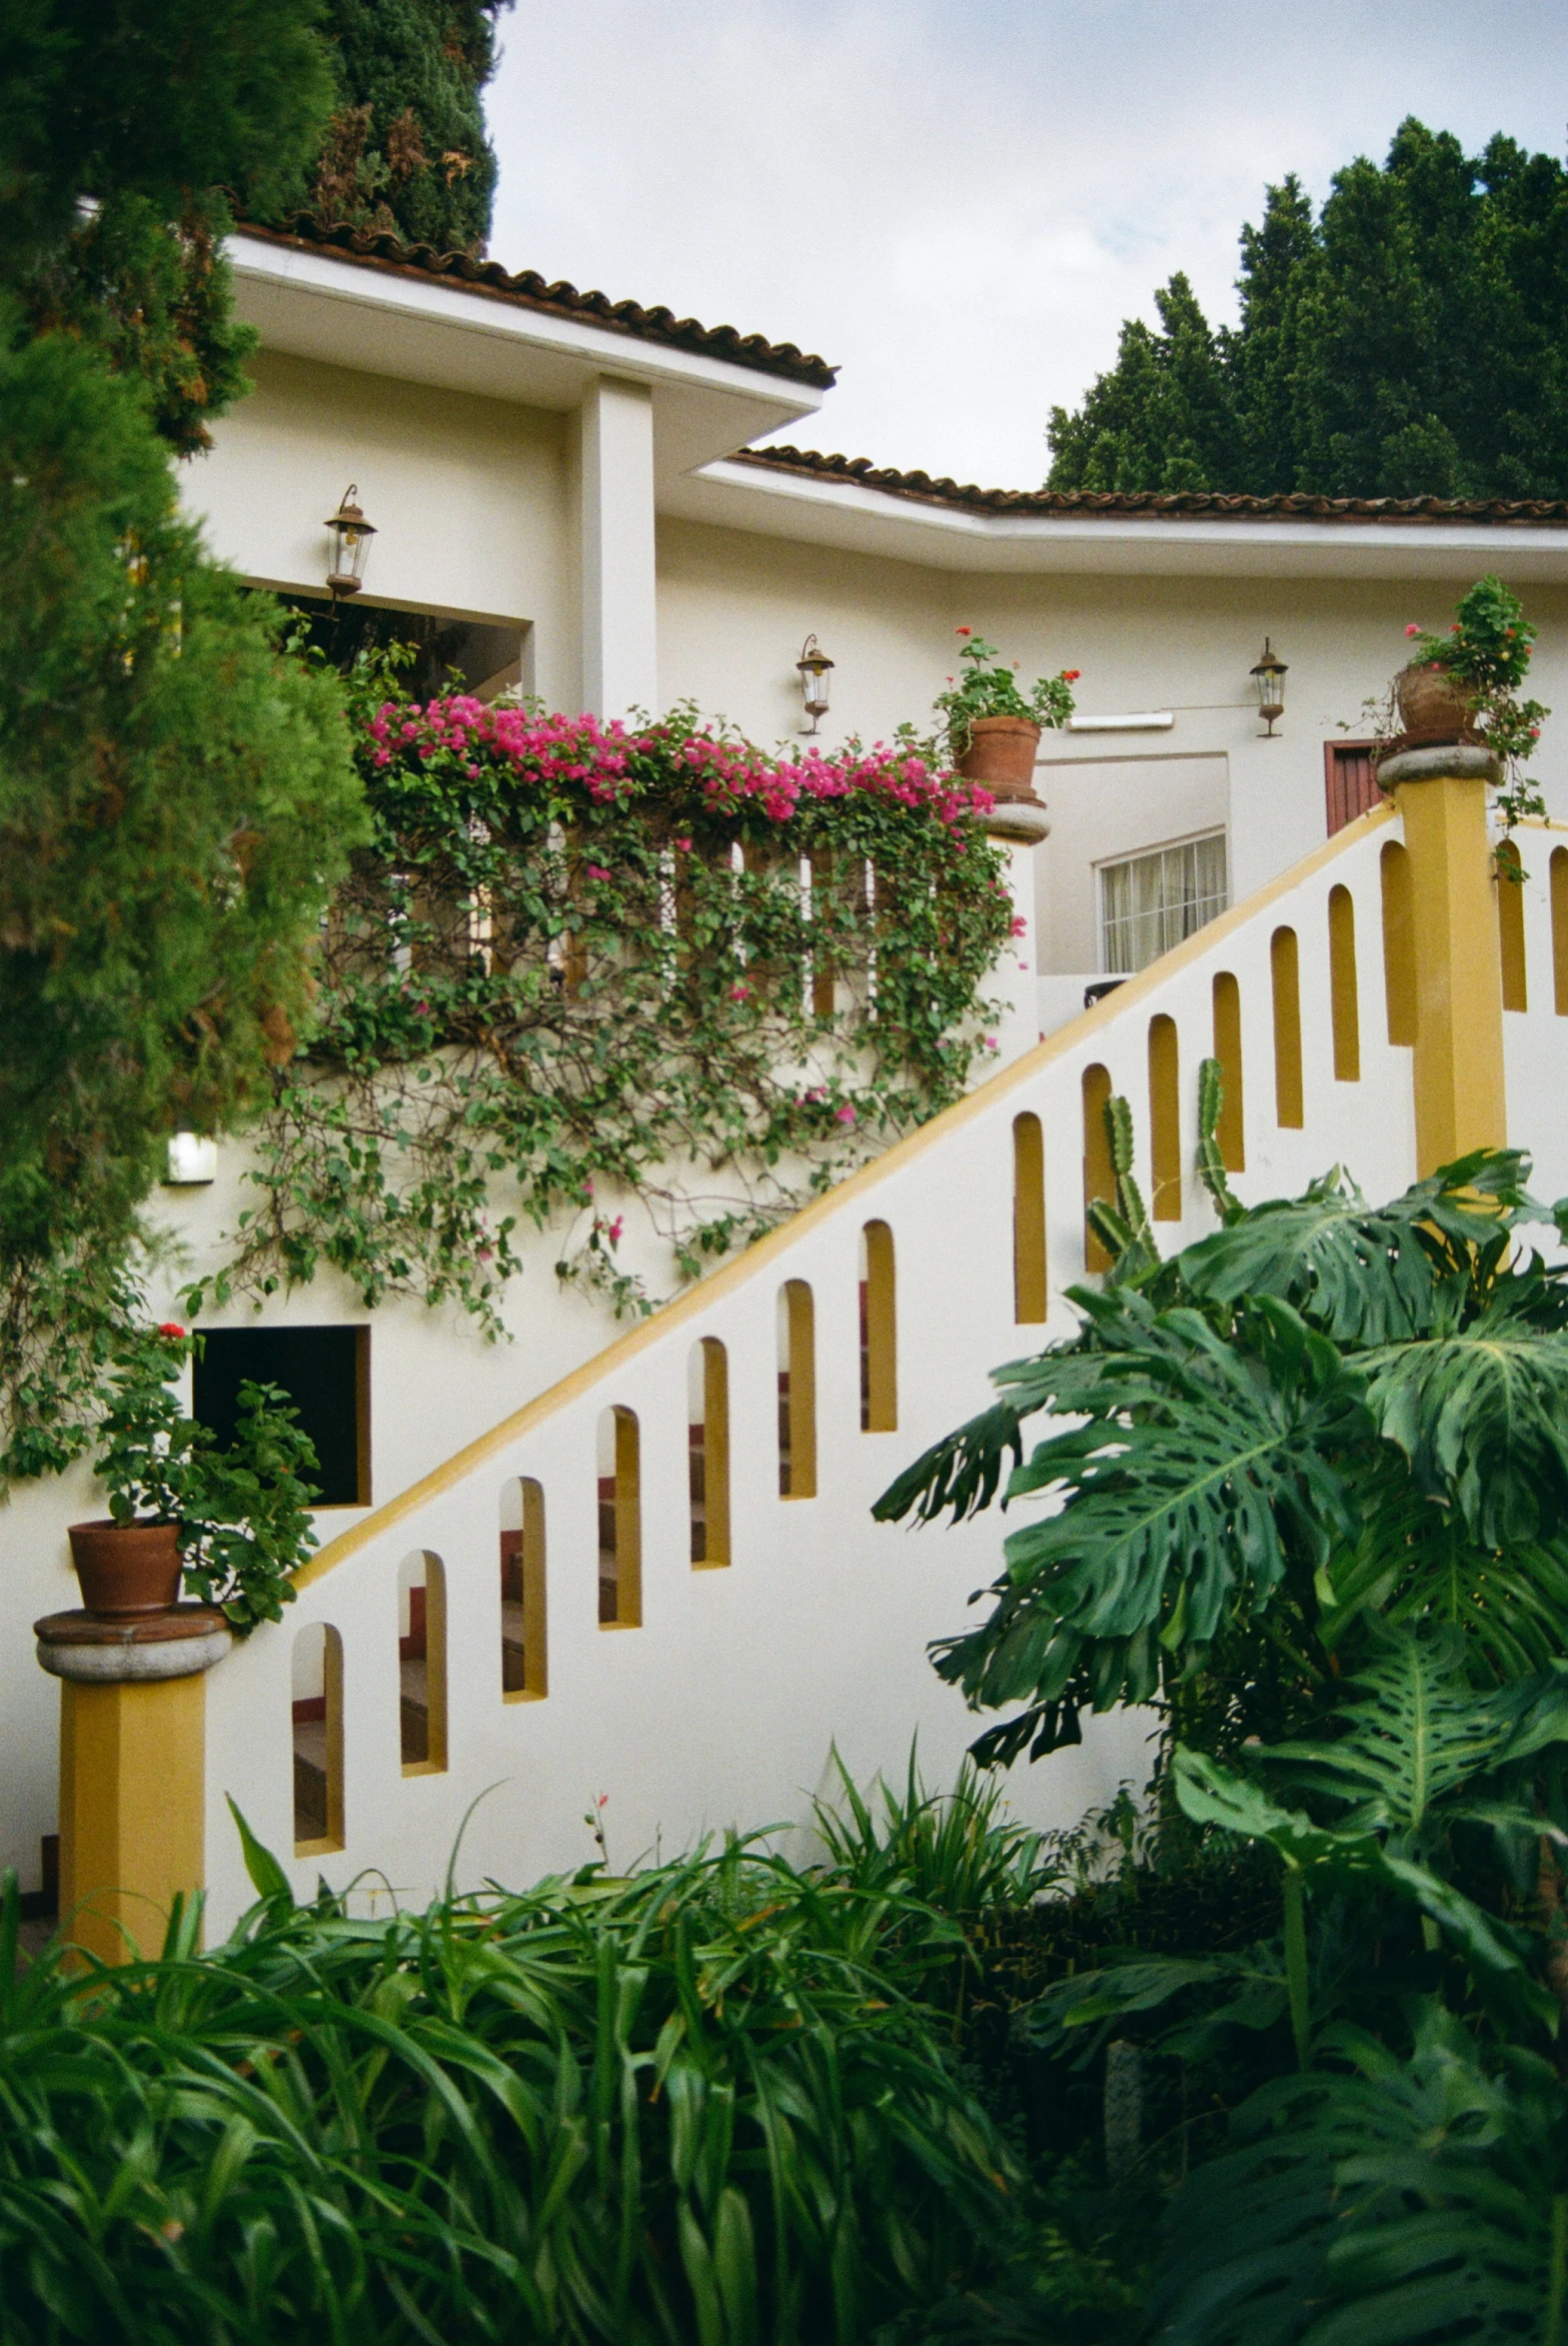 the house has many window boxes and potted plants on the wall